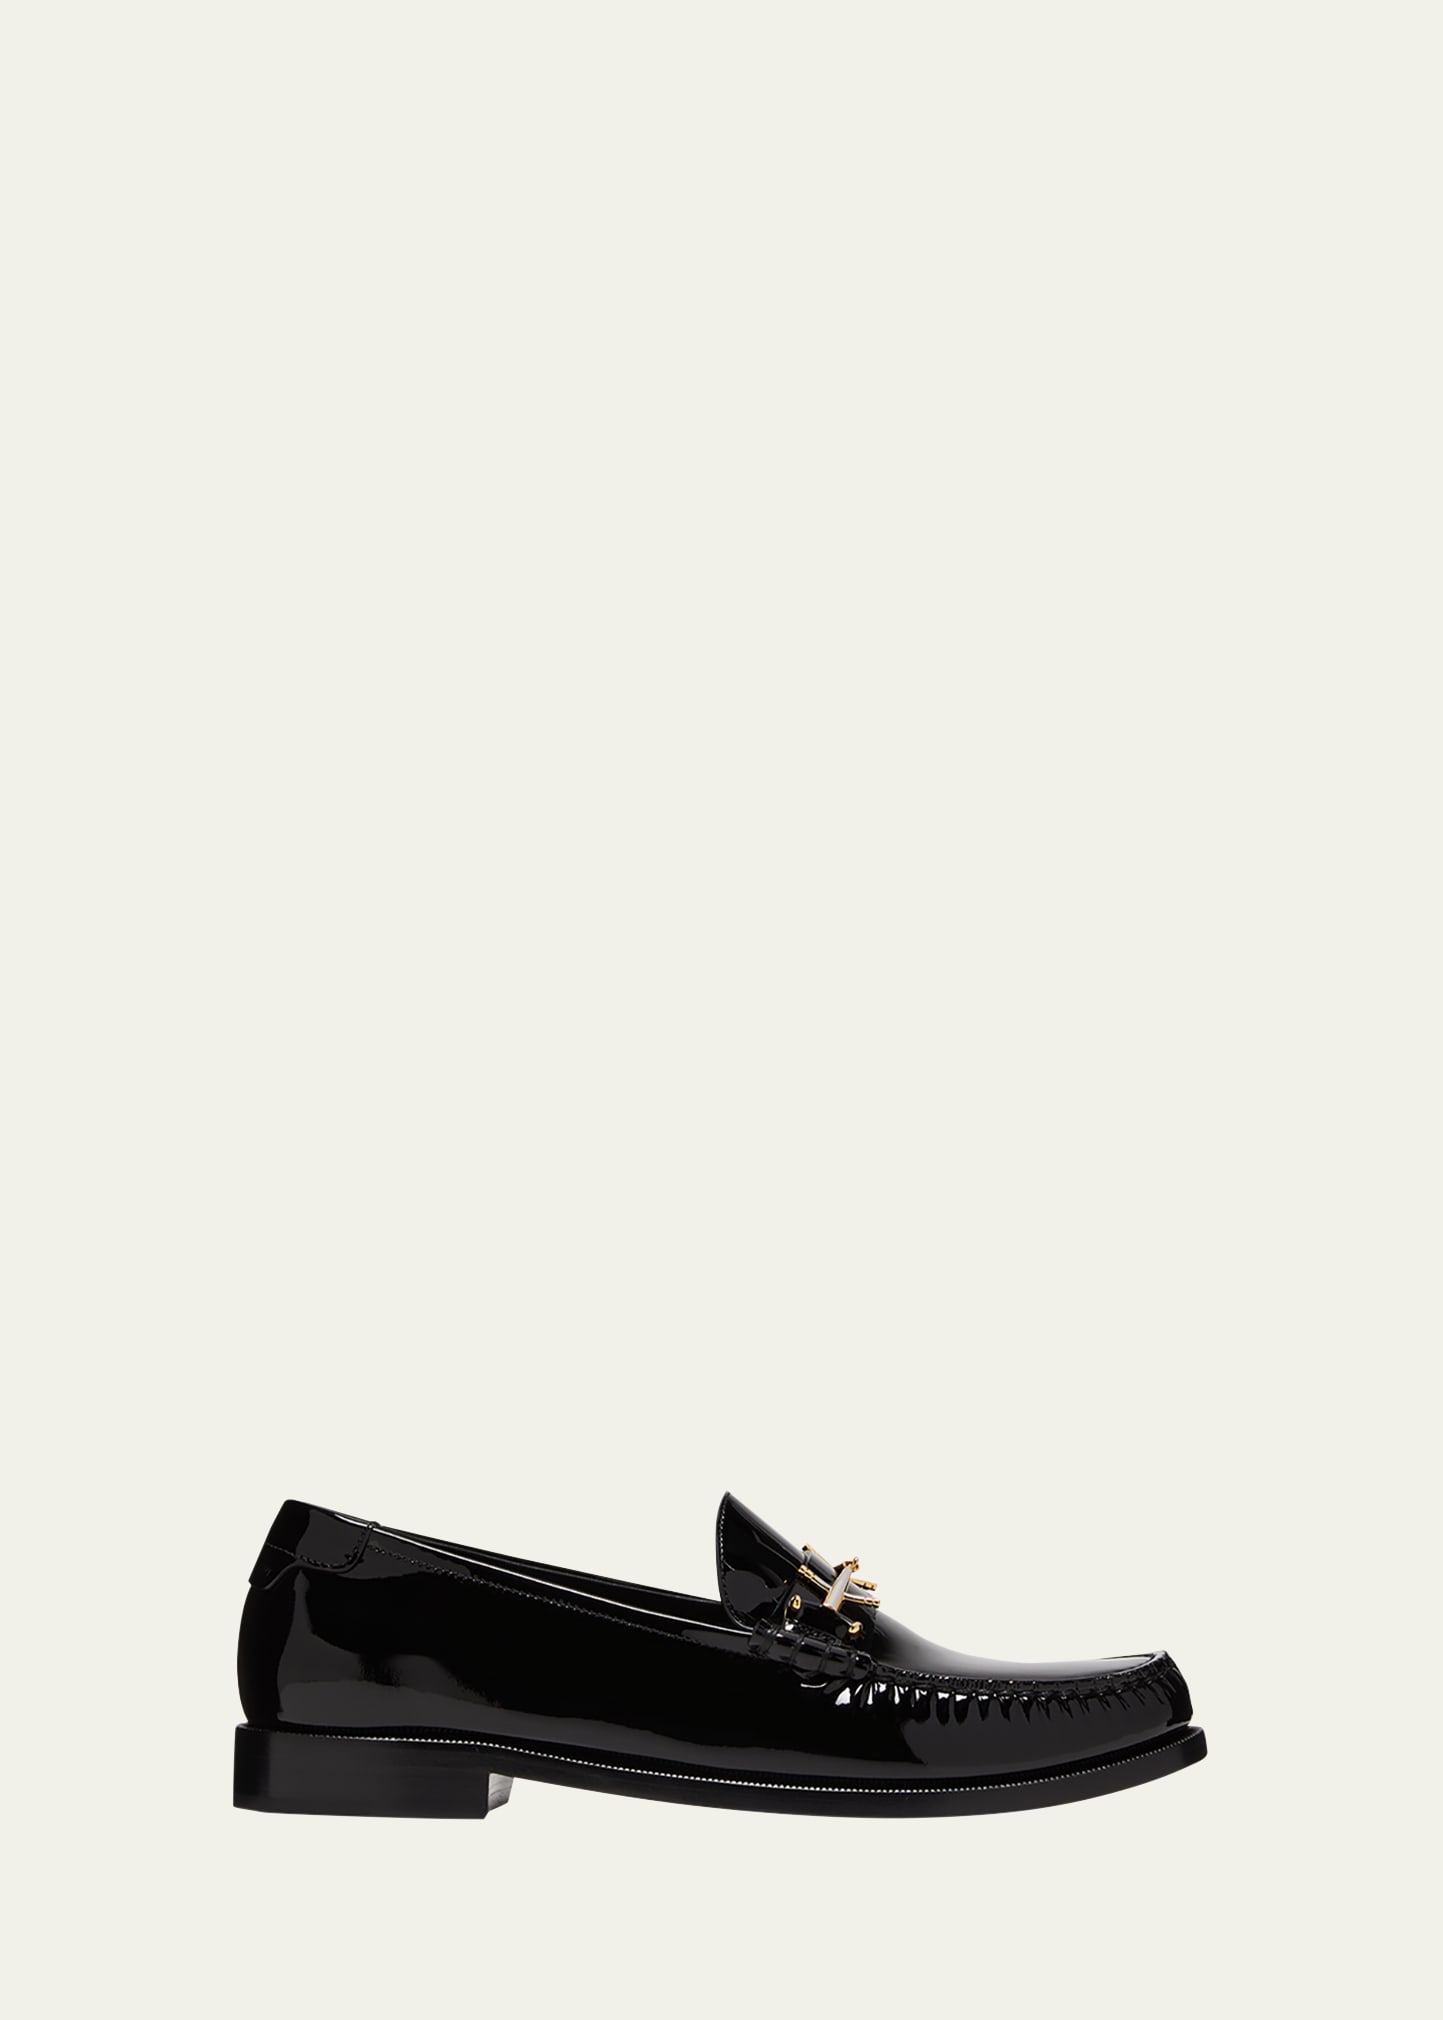 Men's Patent Leather Loafers